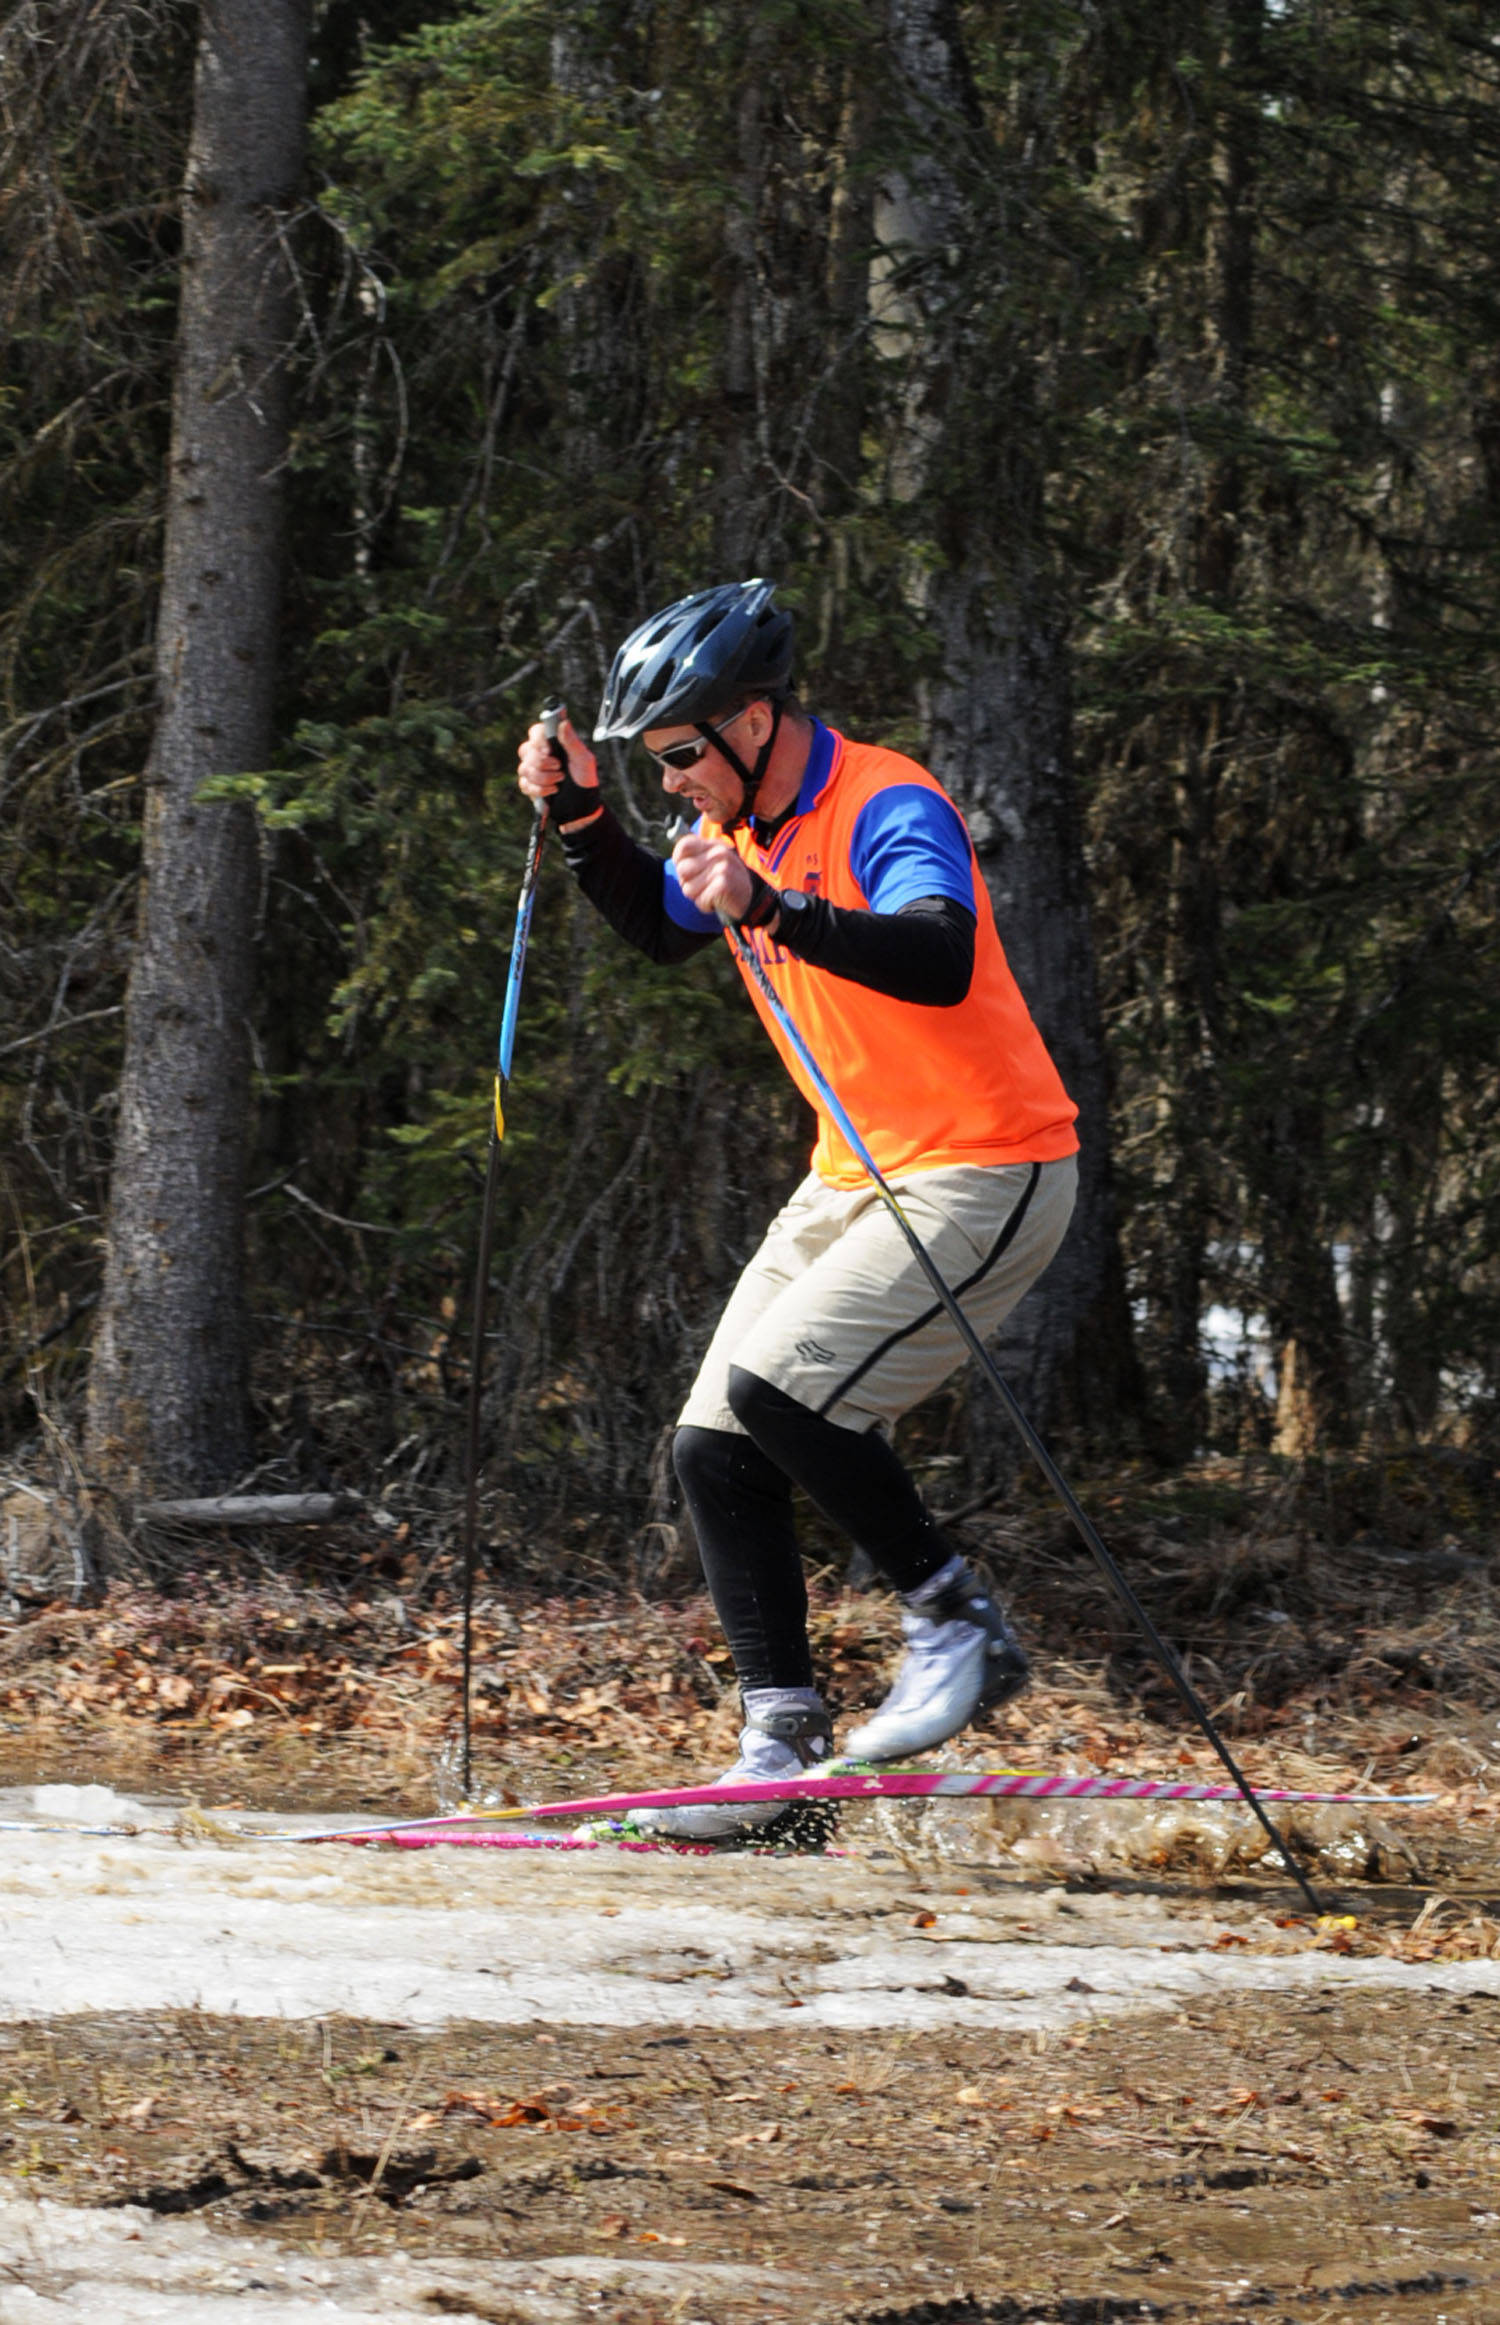 Anthony Murray hops his skis through a muddy section of the Wolverine Trail during the 2018 Choose Your Weapon race at Tsalteshi Trails on Sunday, April 15, 2018 in Soldotna, Alaska. Racers completed two 5-kilometer laps around the lower trails by running, biking or skiing, with the option of switching between laps for extra points. Most of the trails had some snow with patches of wet mud sprinkled throughout as spring temperatures begin to dominate the central Kenai Peninsula. (Photo by Elizabeth Earl/Peninsula Clarion)